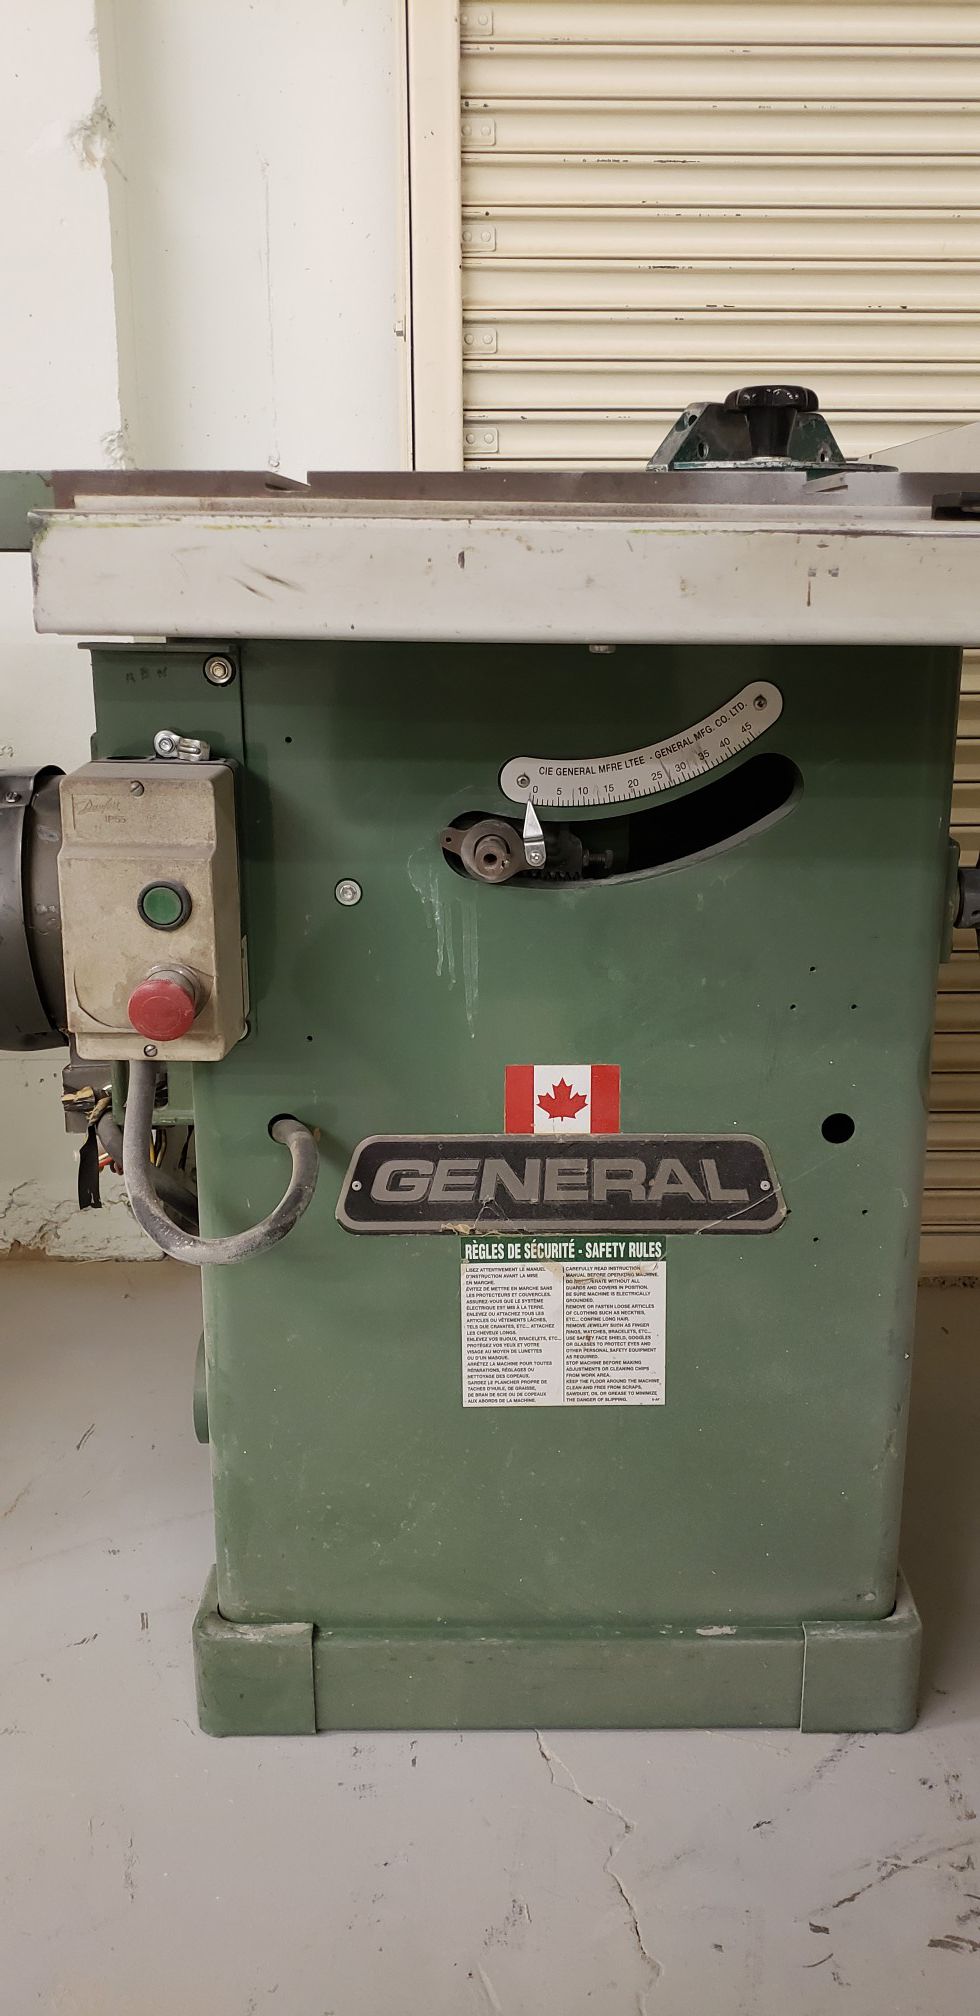 General table saw - $430